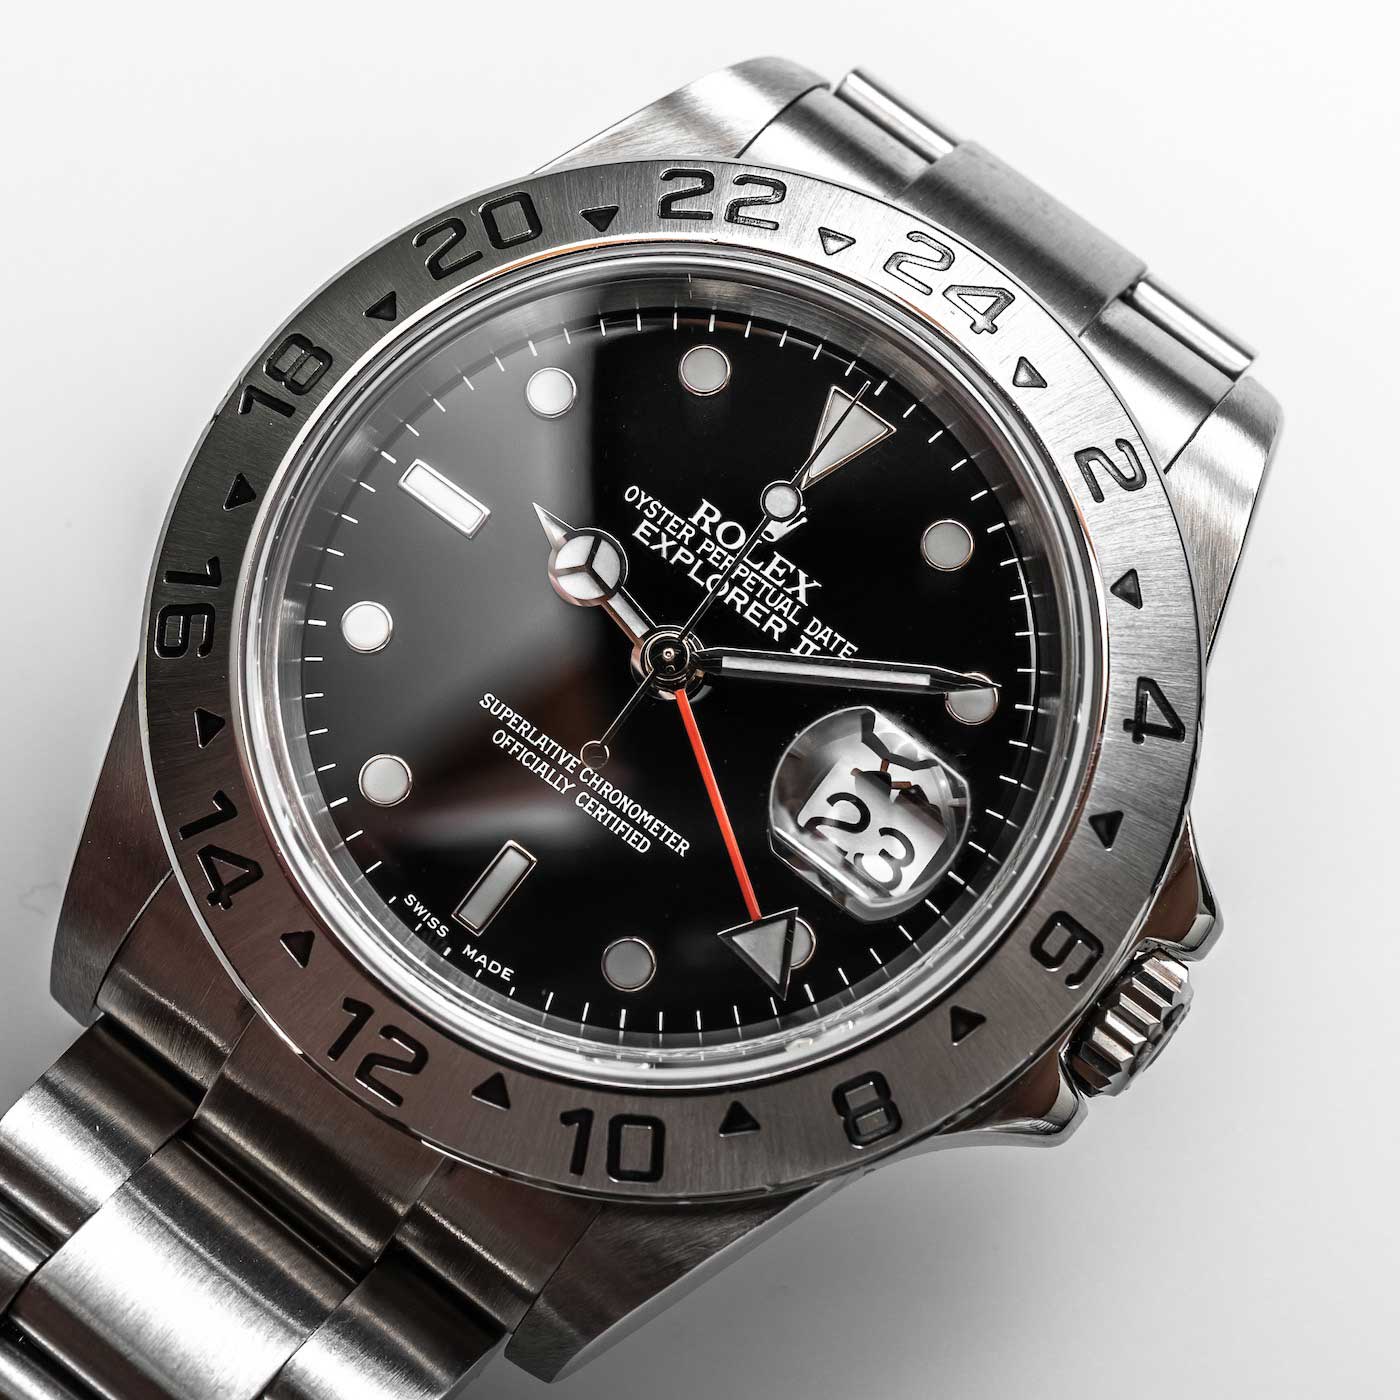 The Rolex 16570